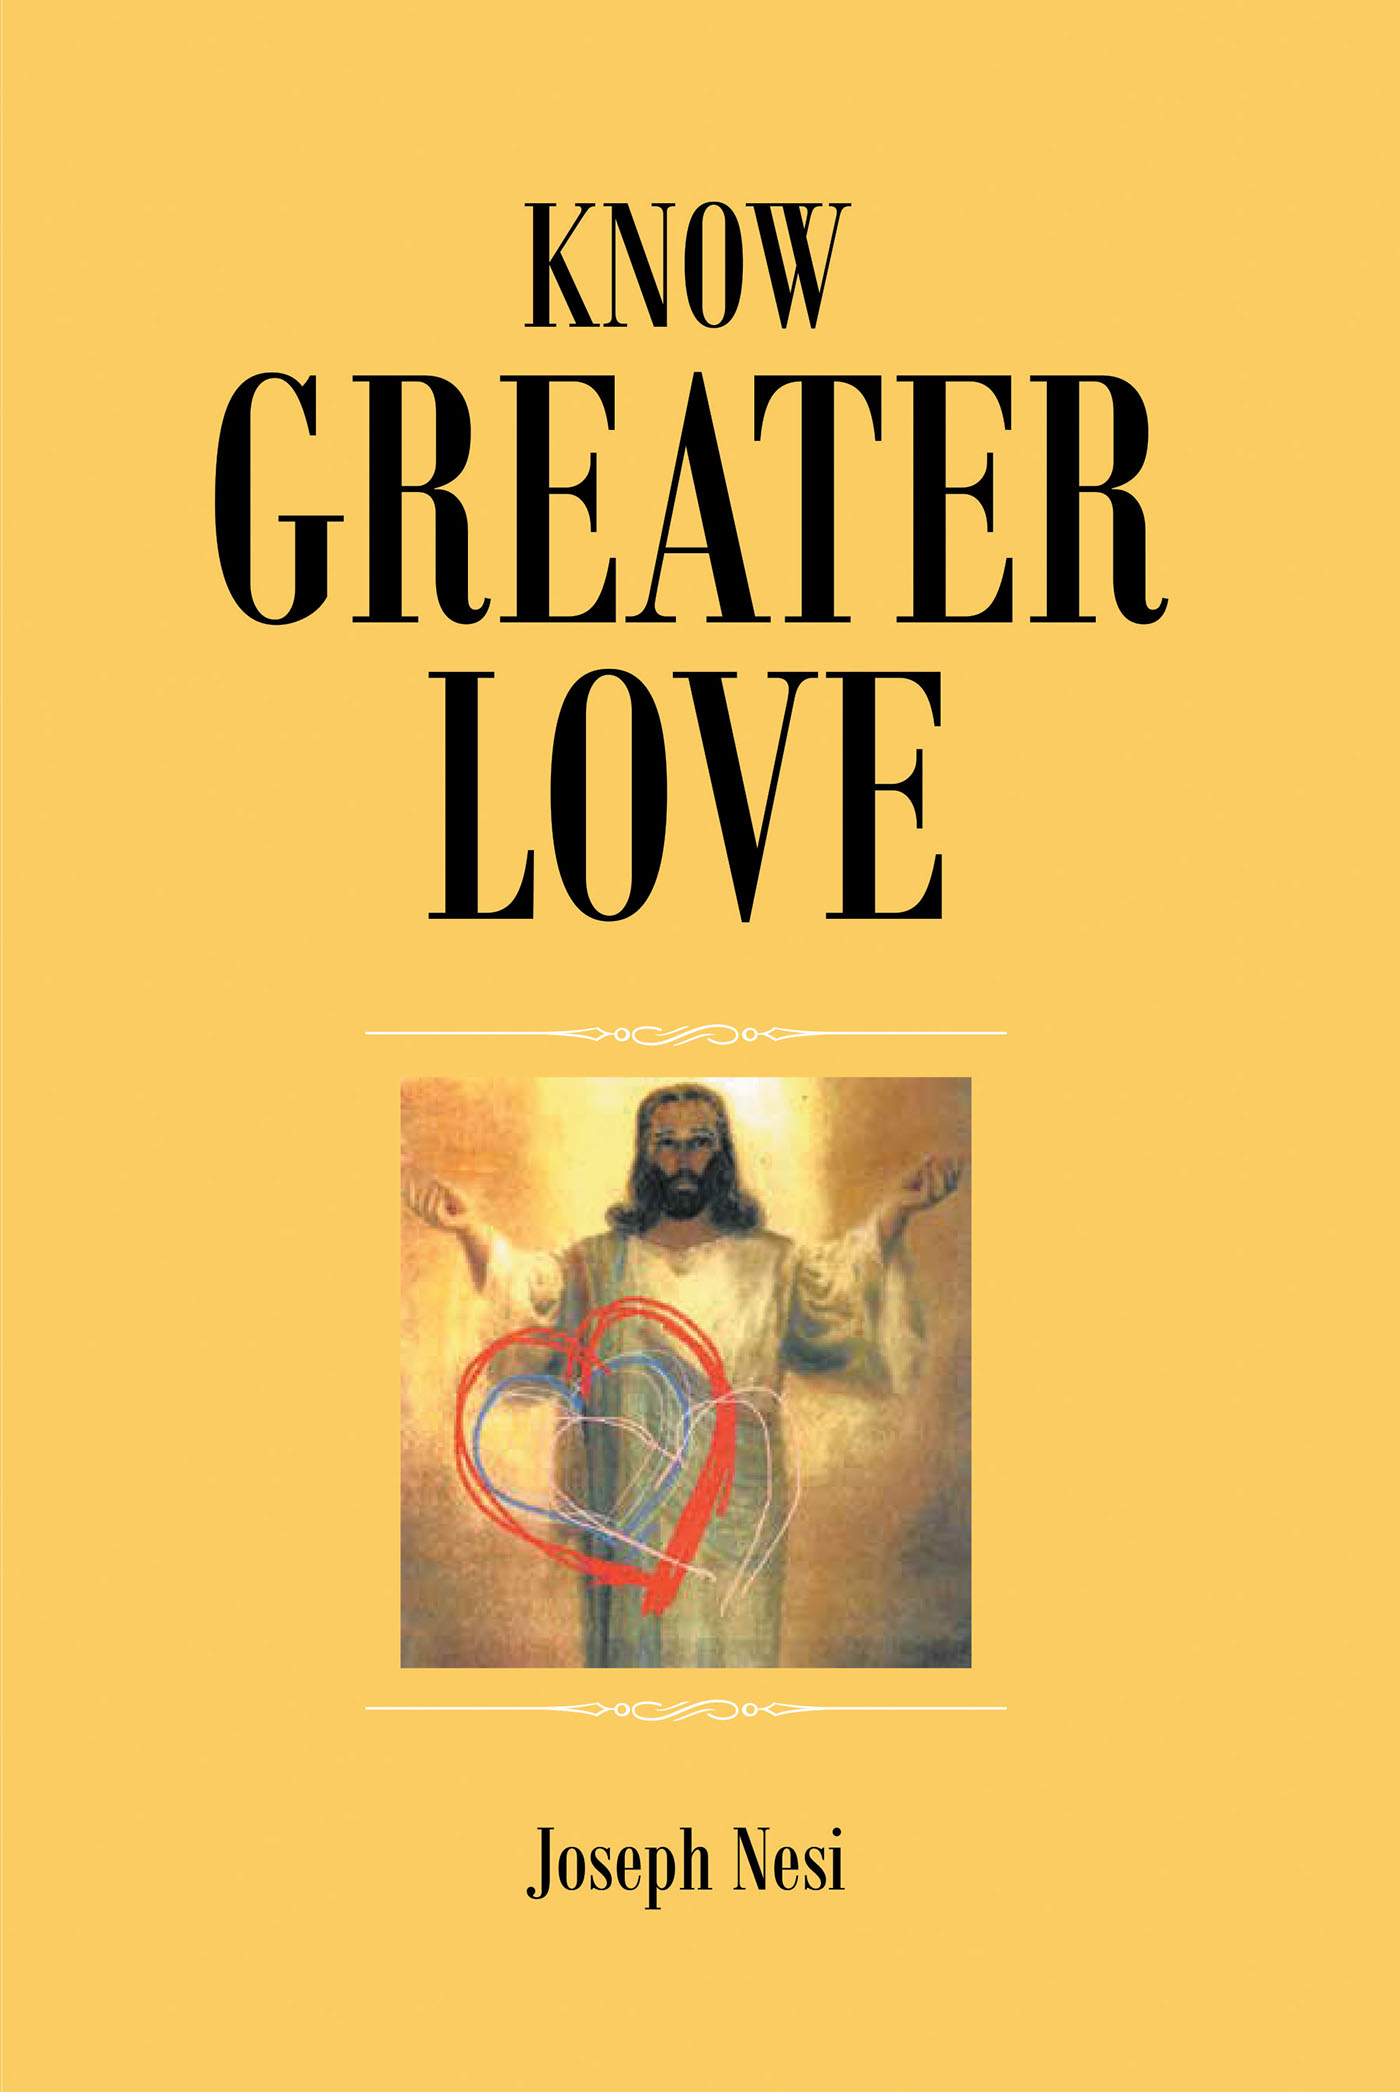 Joseph Nesi’s New Book, "Know Greater Love," is a New Pious Novel That Gives Readers a Unique and Contemporary Take on Some Classic Bible Stories